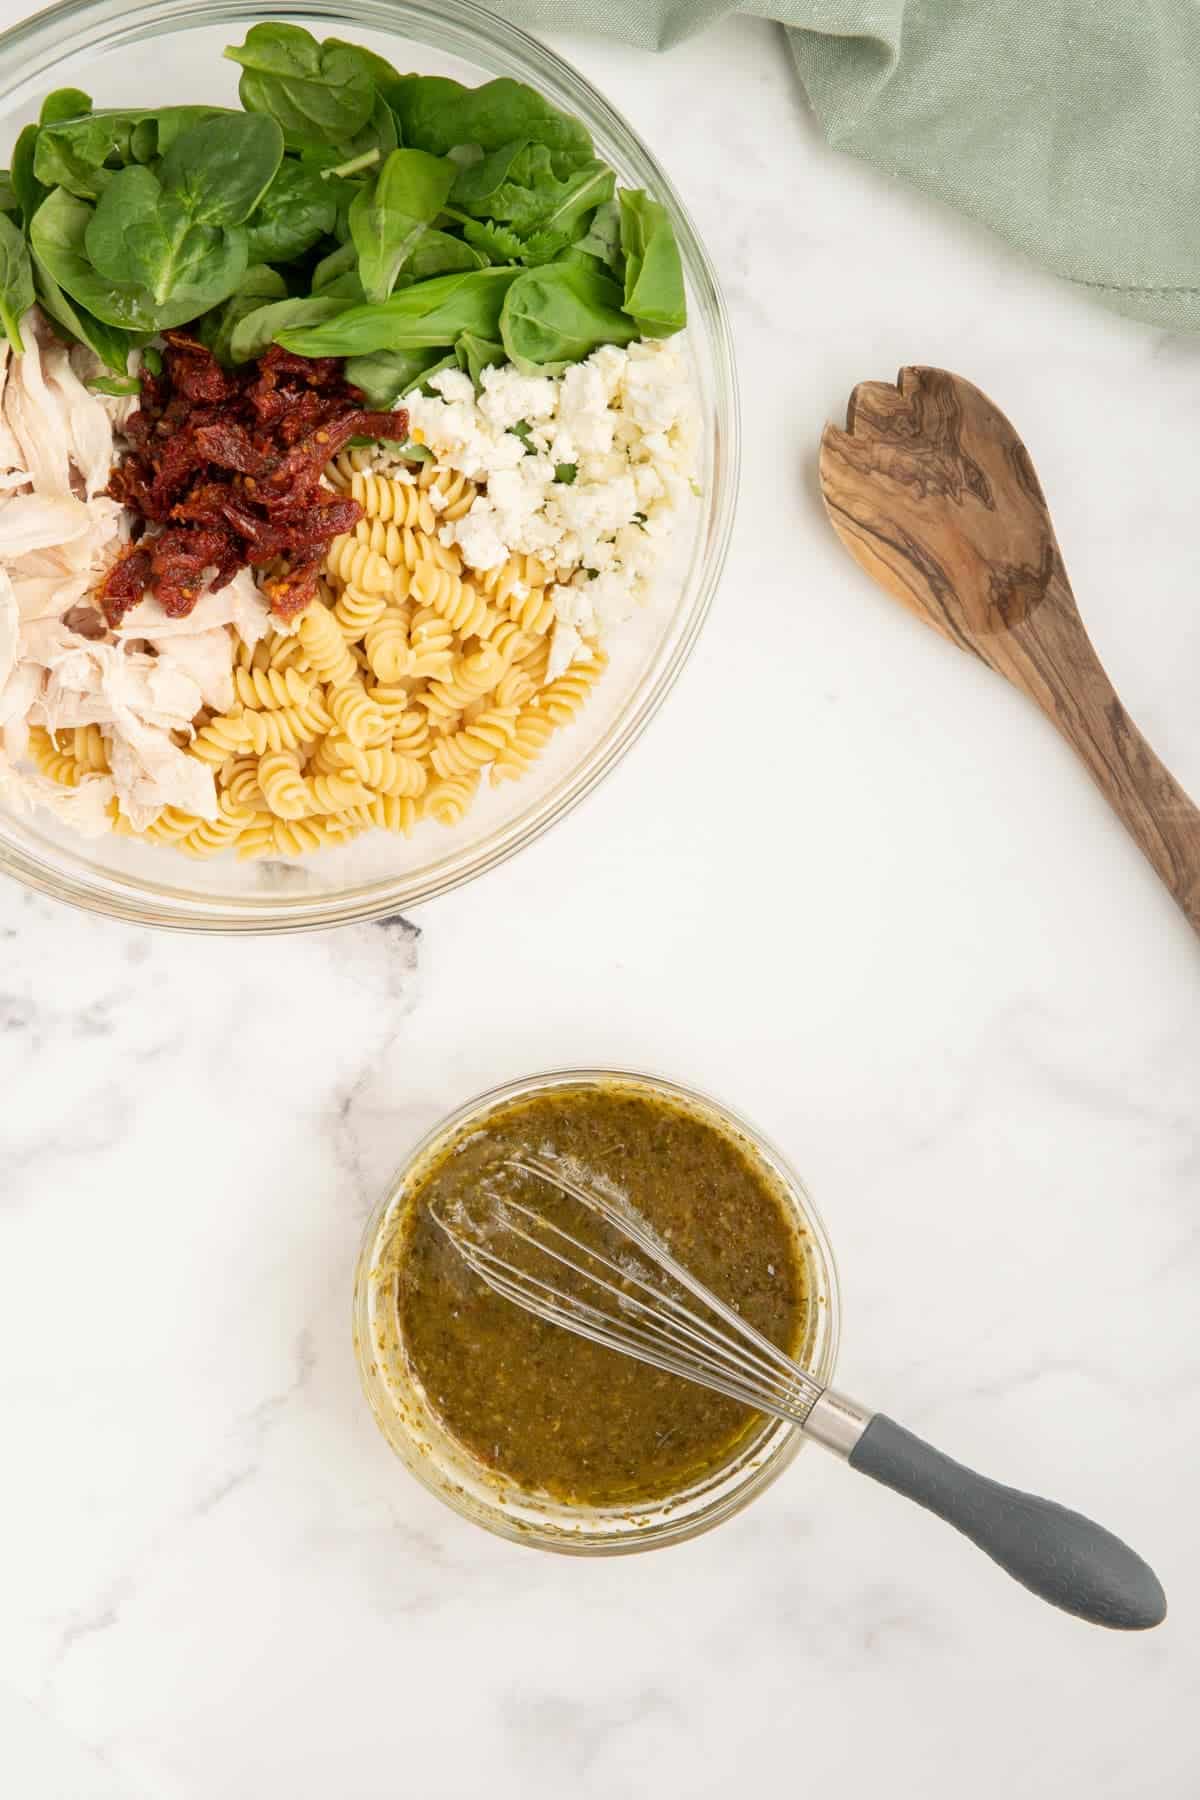 Pesto and Italian dressing mixed together to make the dressing for chicken pesto pasta salad.